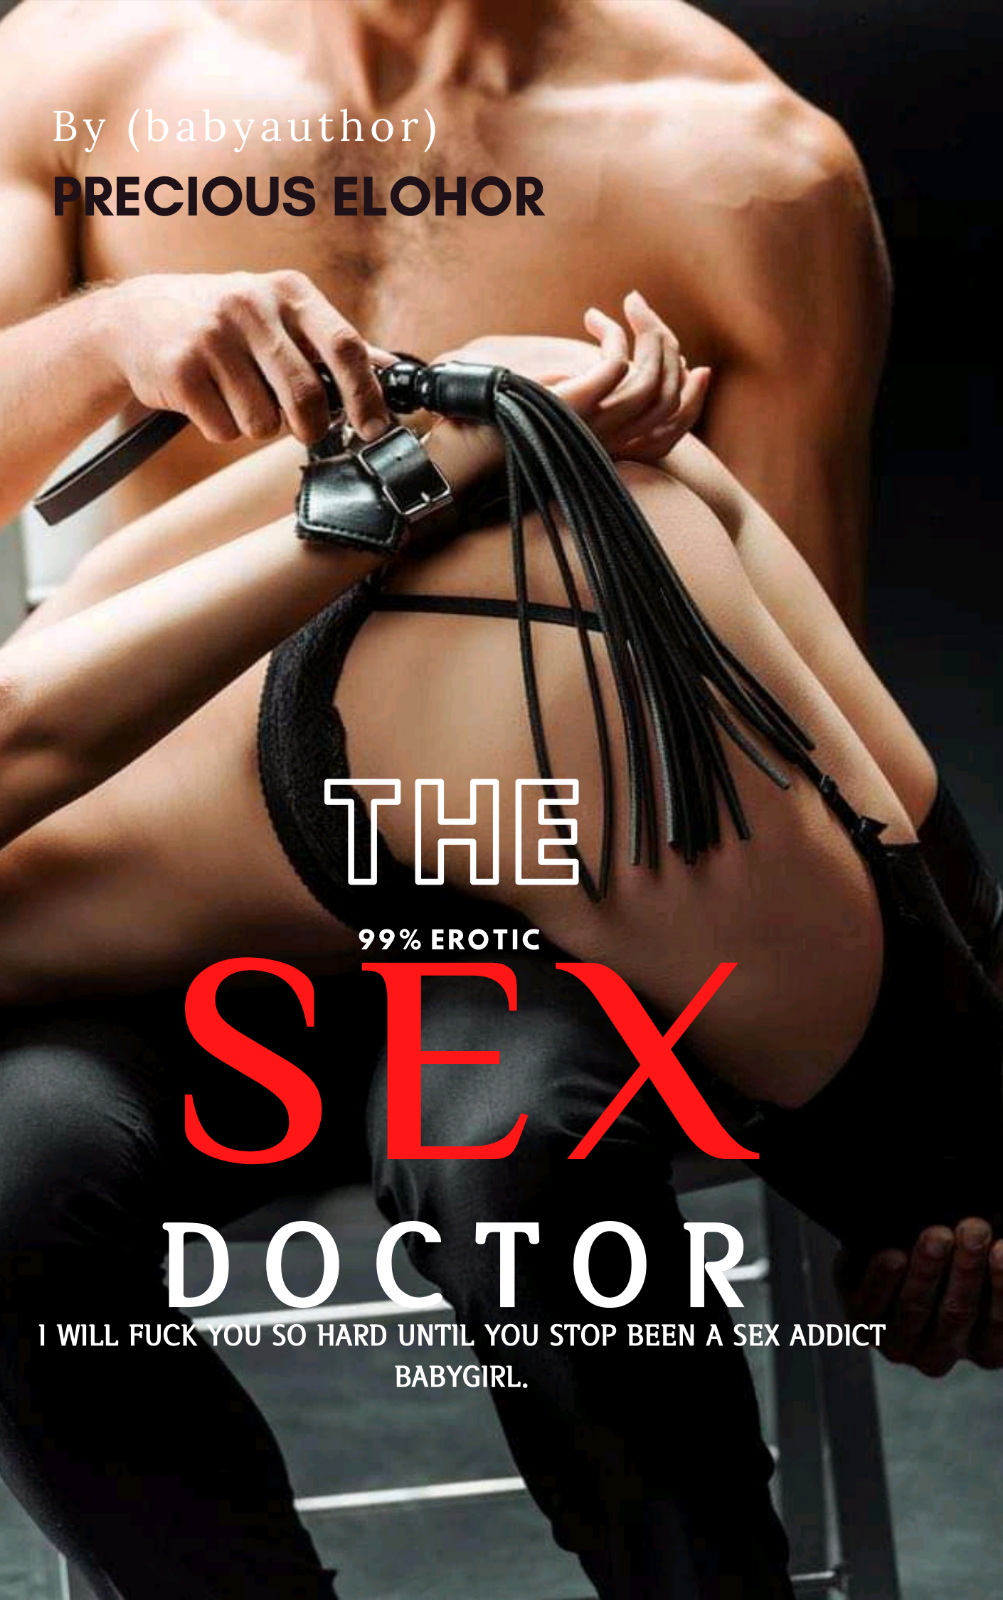 THE SEX DOCTOR HIS SUBMISSIVE (18+) Novel Full Story Book image